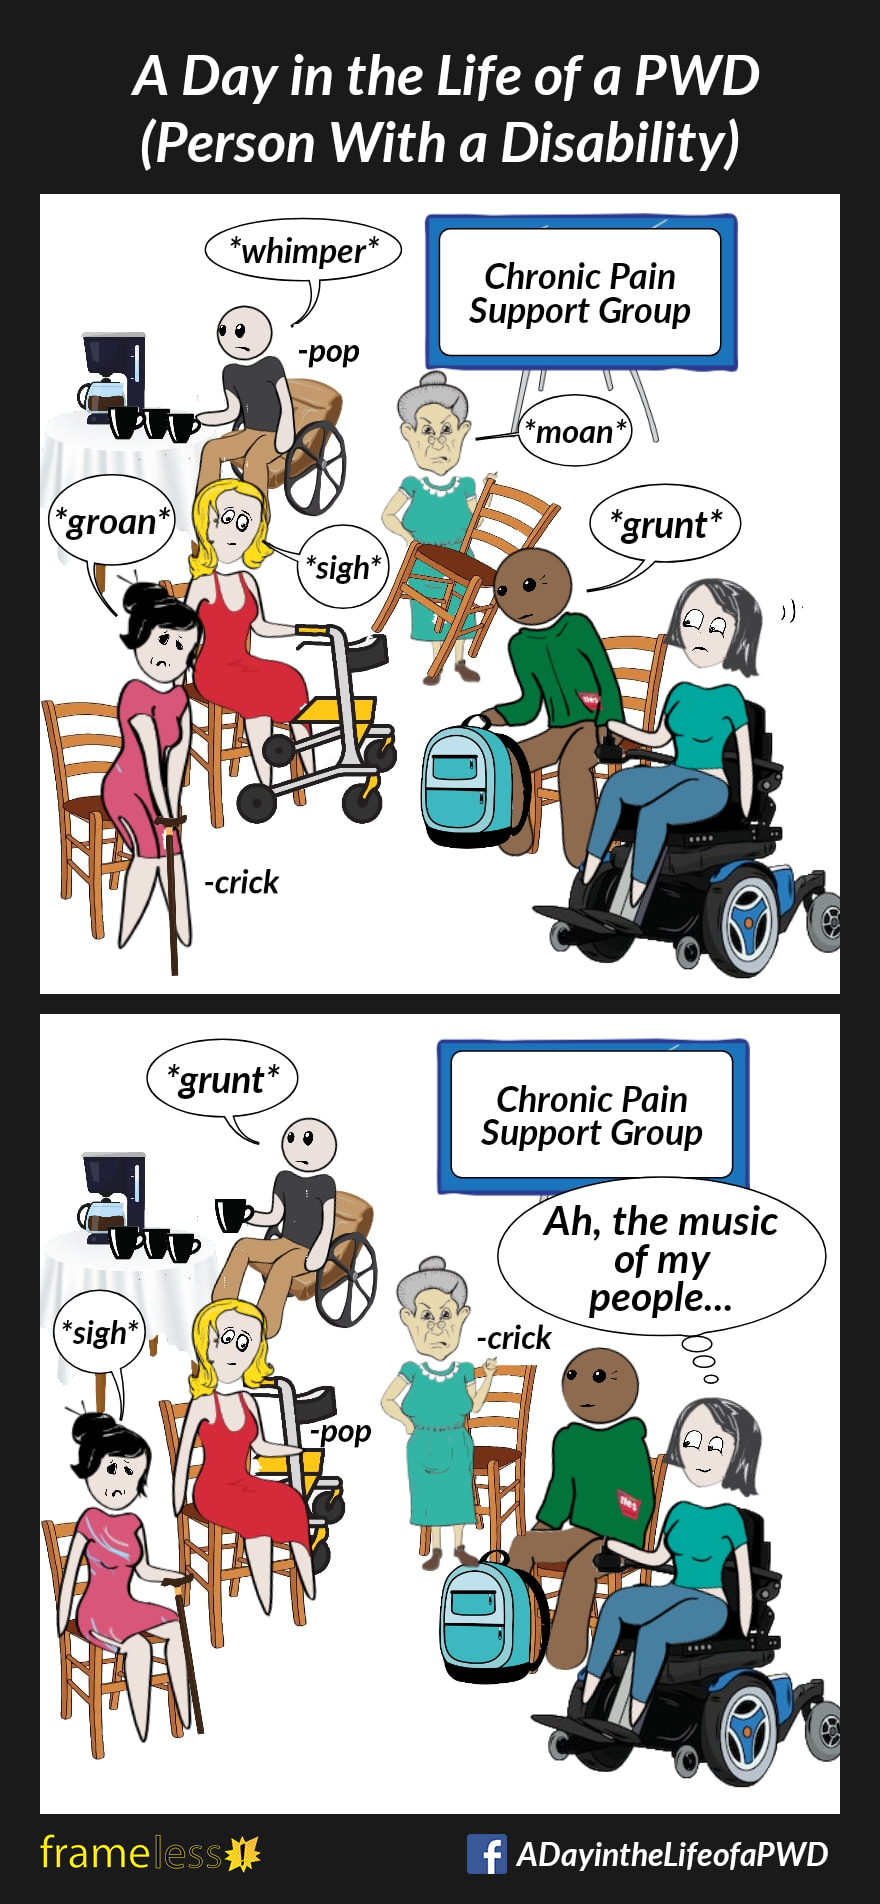 COMIC STRIP 
A Day in the Life of a PWD (Person With a Disability) 

Frame 1:
A woman in a power wheelchair enters a Chronic Pain Support Group meeting. Various people are settling in:
-A woman using a cane is sitting down, her knee 'cricks', and she 